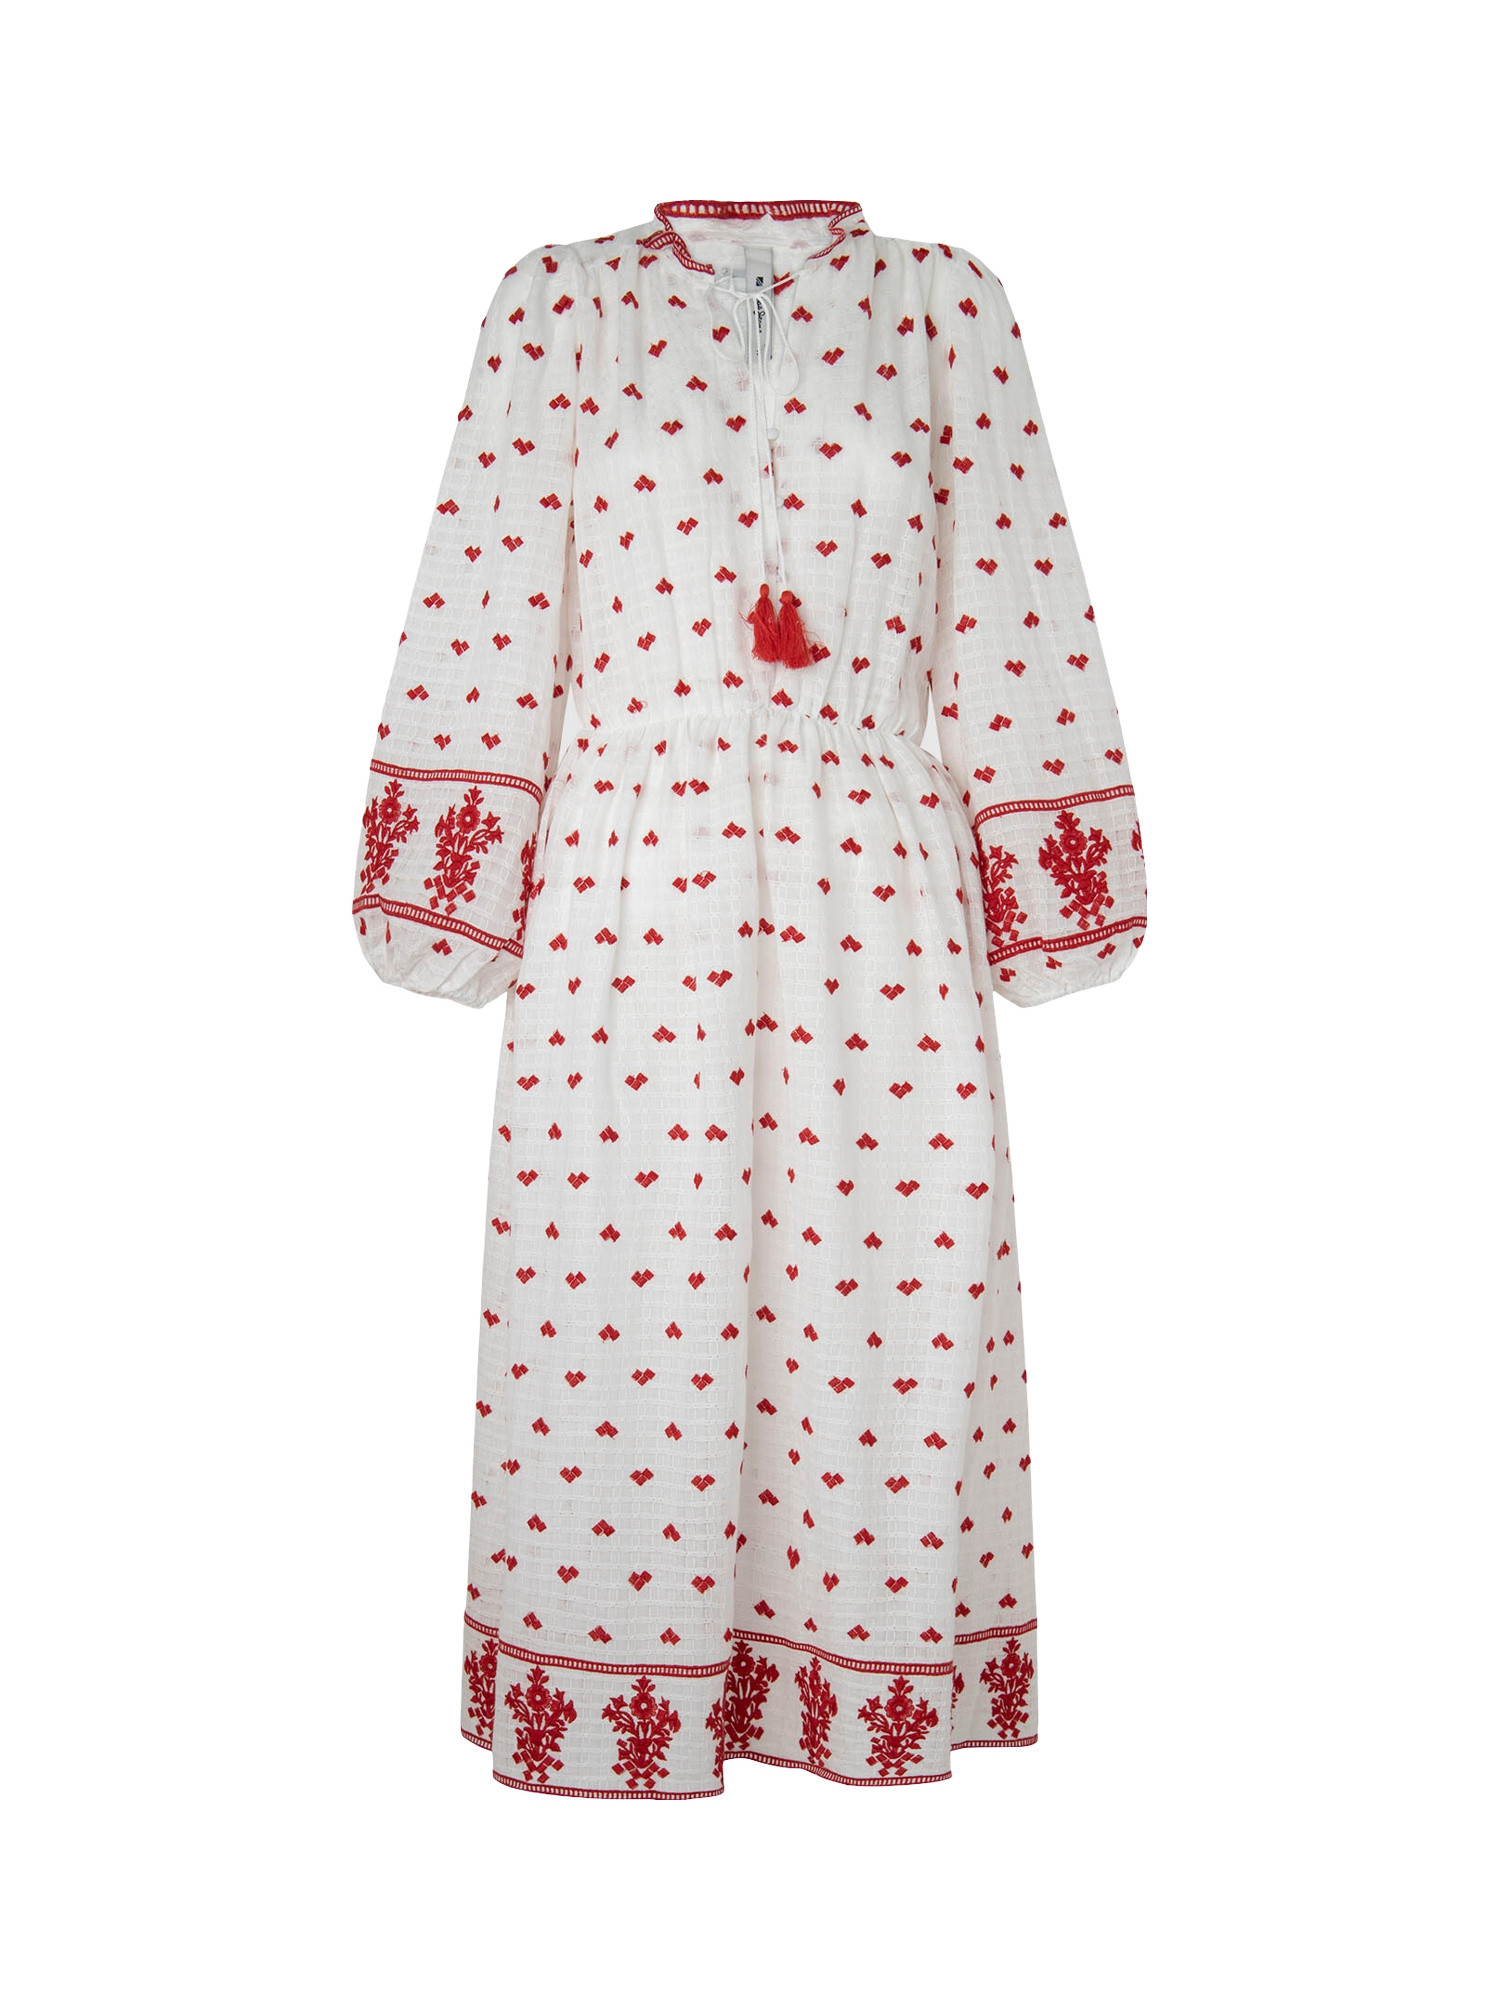 Pepe Jeans - Long patterned dress, White, large image number 0